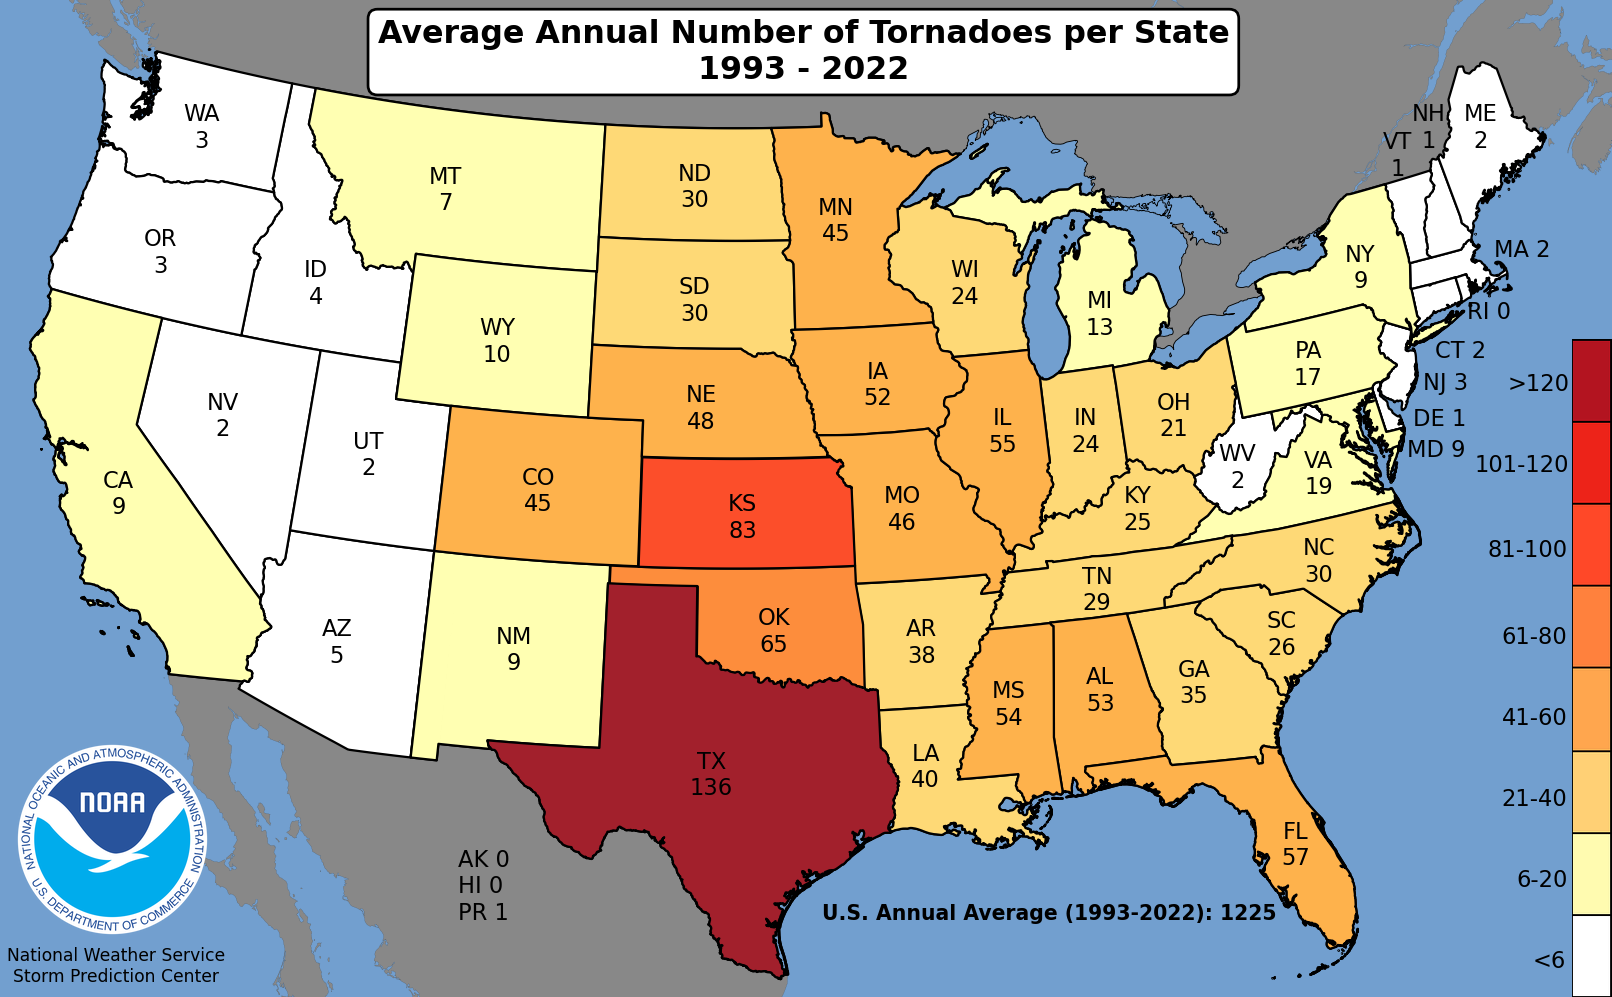 Average Annual Number of Tornadoes per State 1993 - 2022